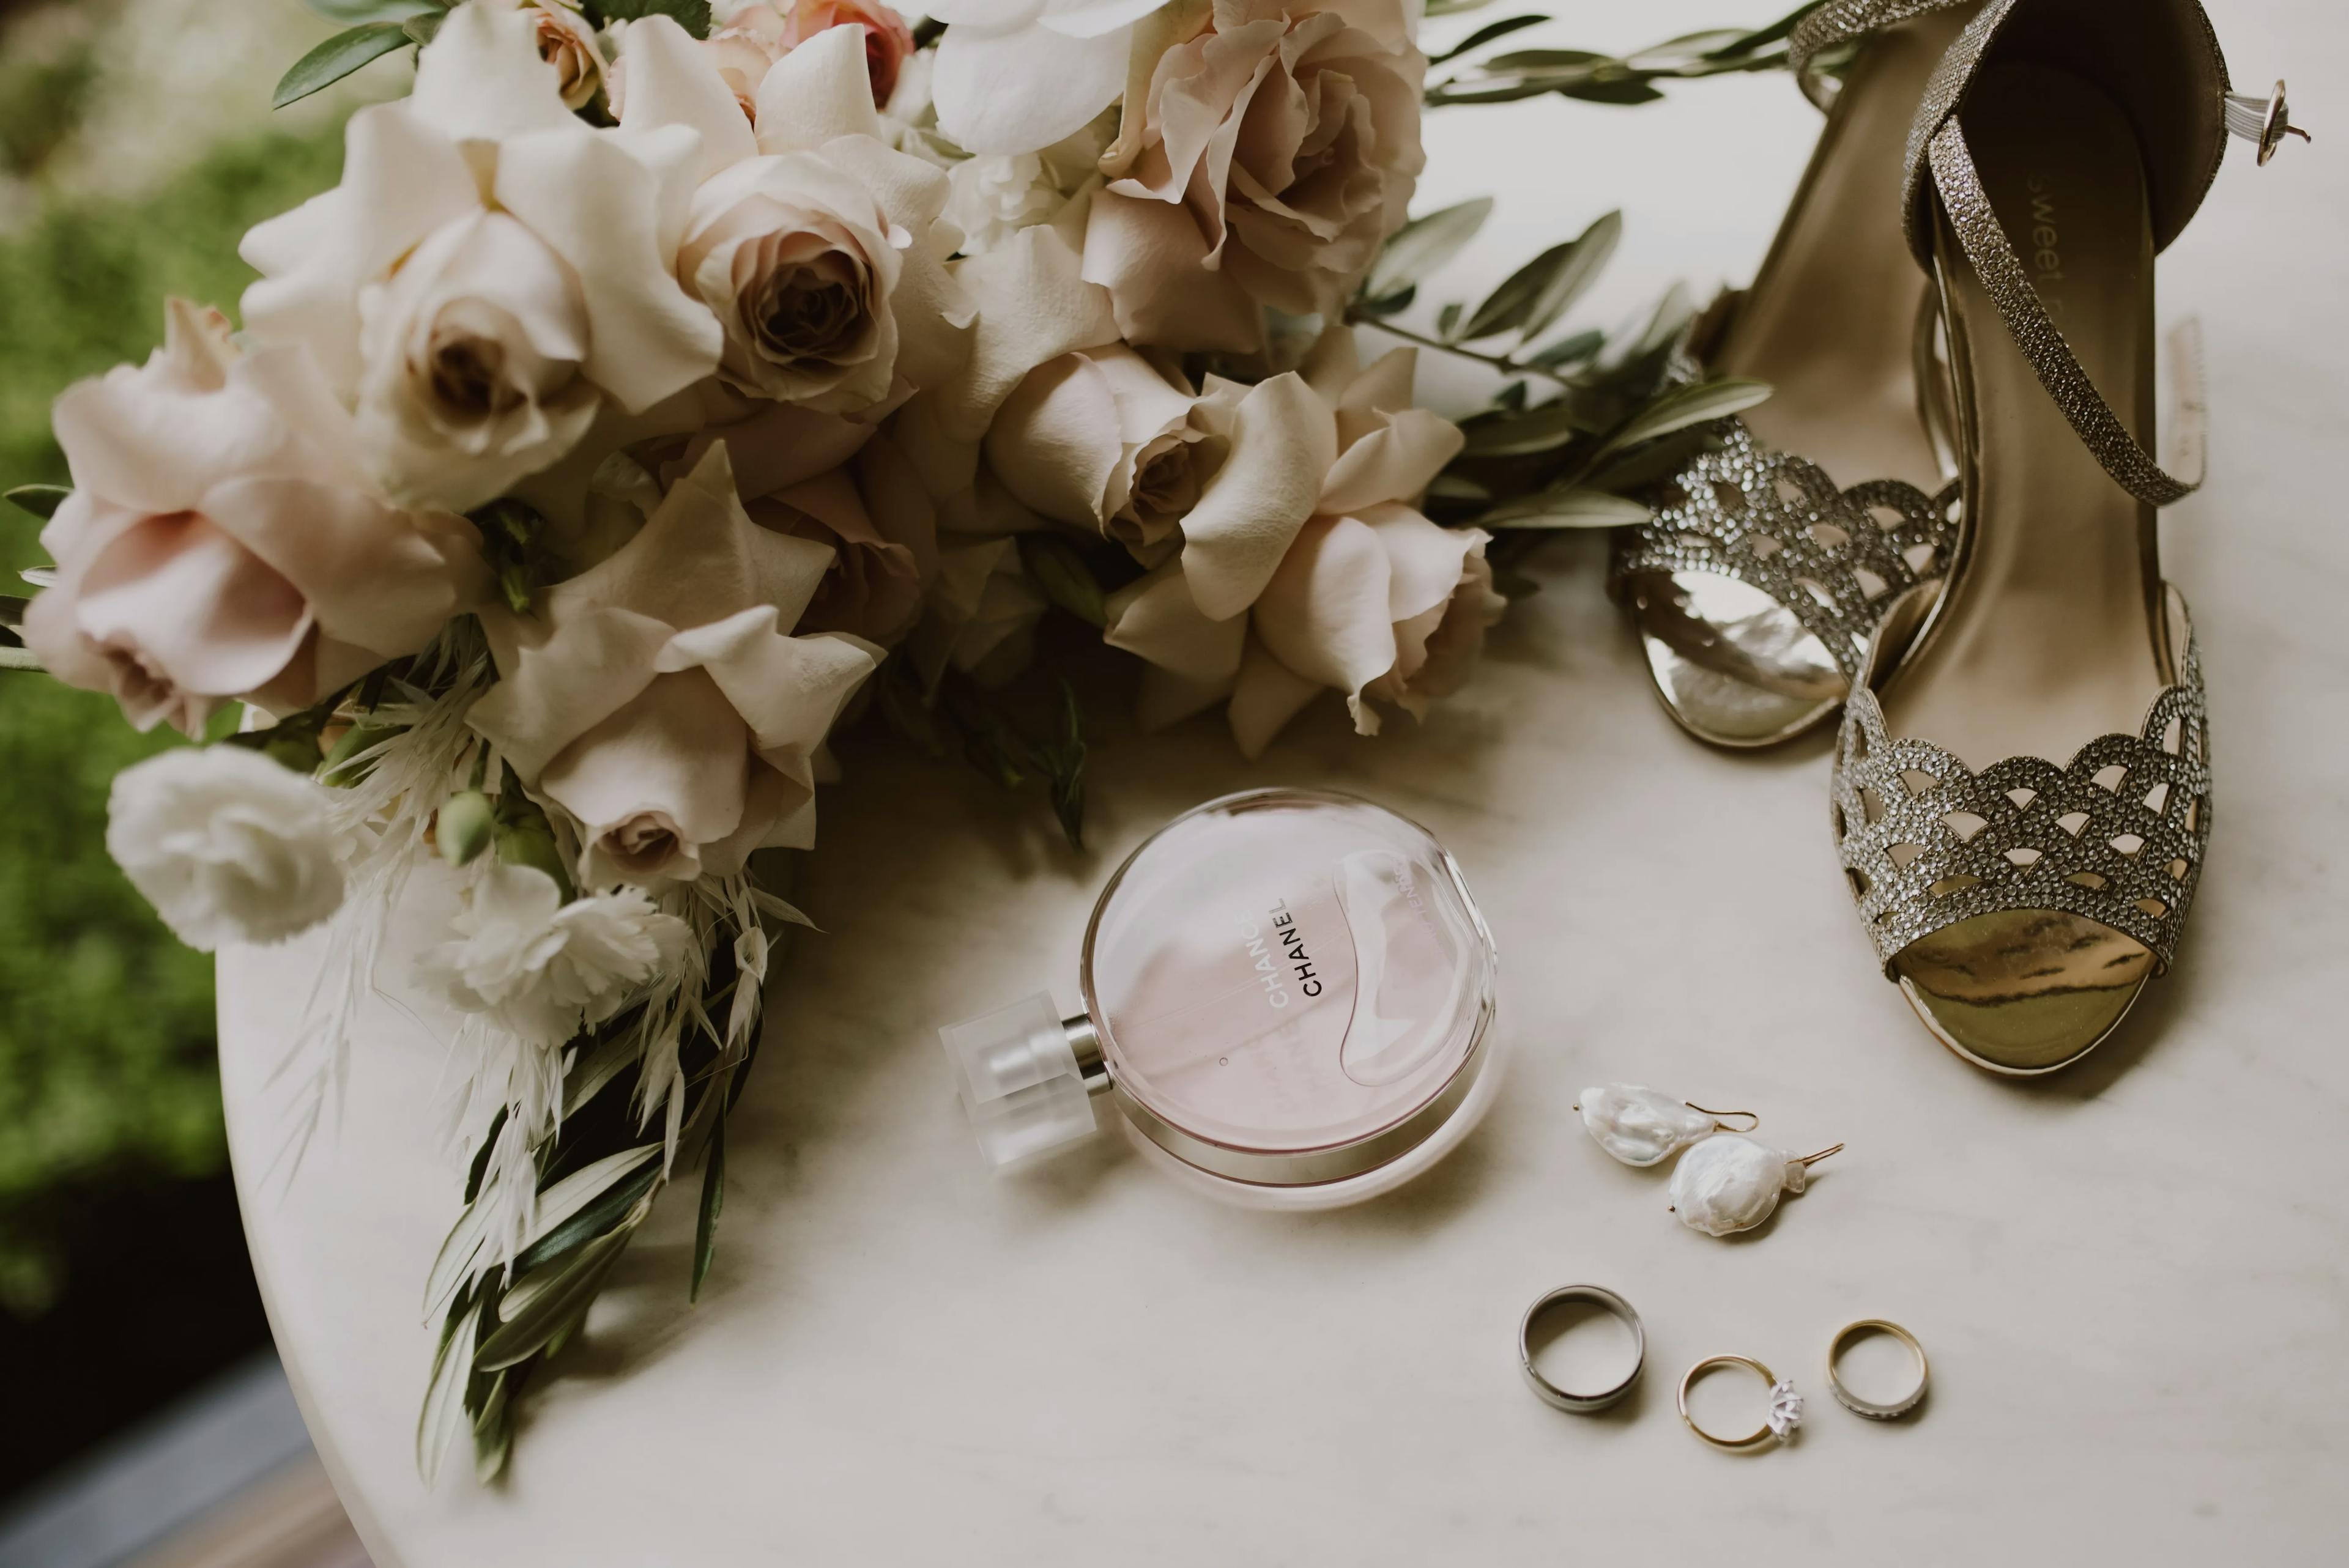 A bouquet of white and blush roses lies on a table next to a bottle of Chanel perfume, a pair of elegant silver high heels, two rings, a set of drop earrings, and some greenery. The items are displayed on a light-colored surface.